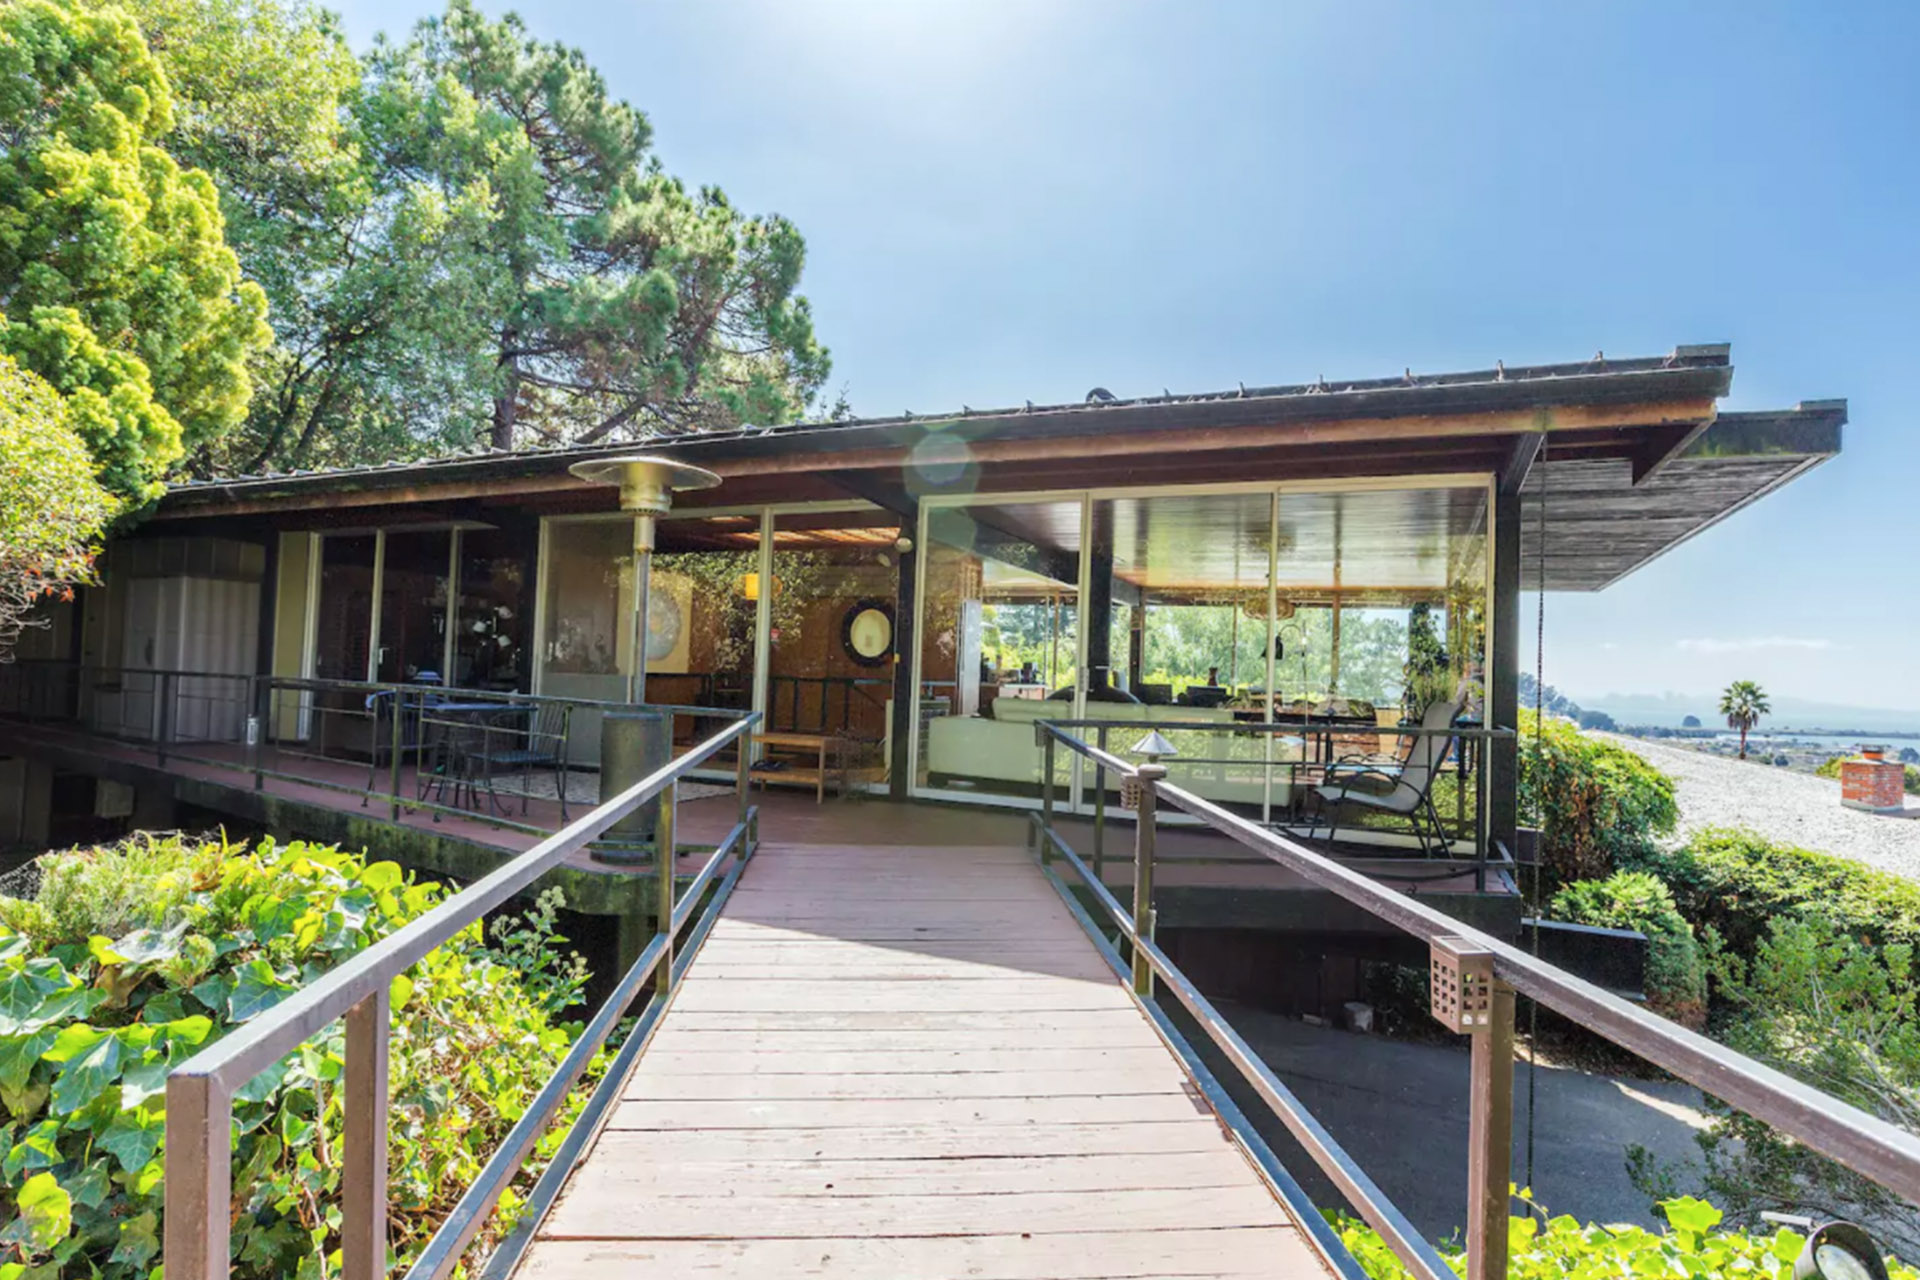 12 More Mid-Century Airbnb Rentals on the West Coast!